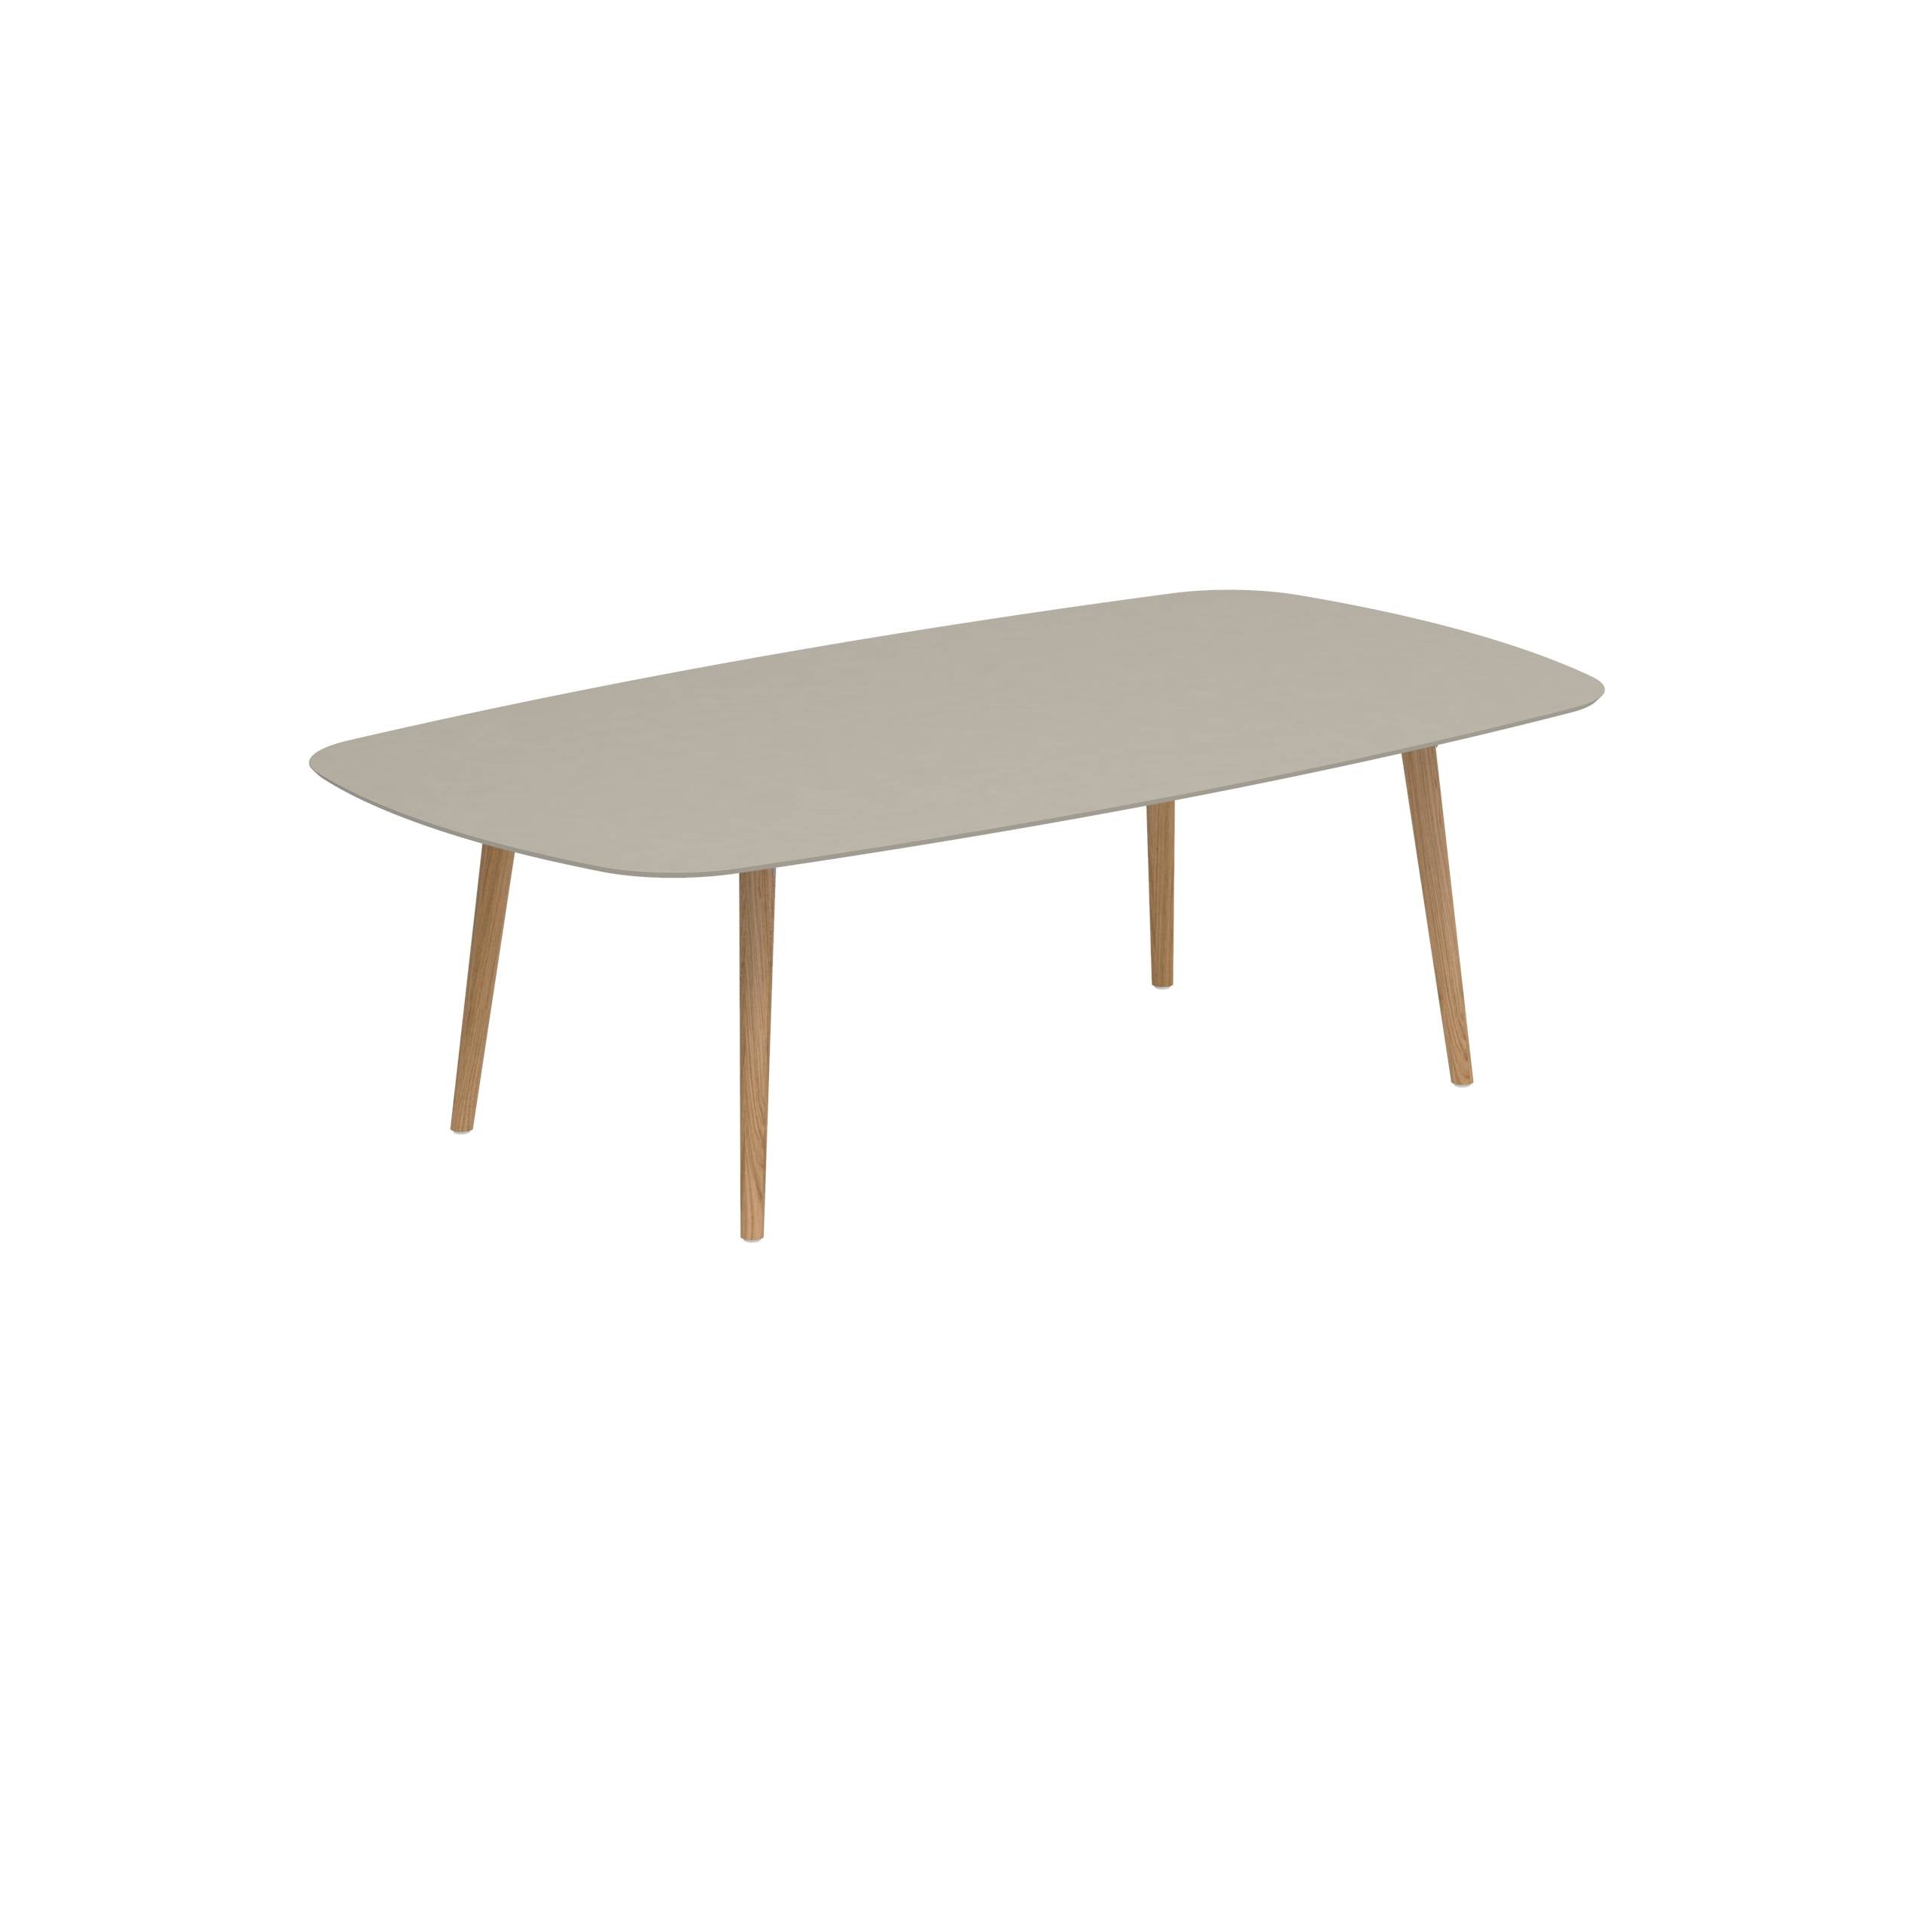 Styletto Low Dining Table 220x120cm Teak Legs Ceramic Tabletop Pearl Grey